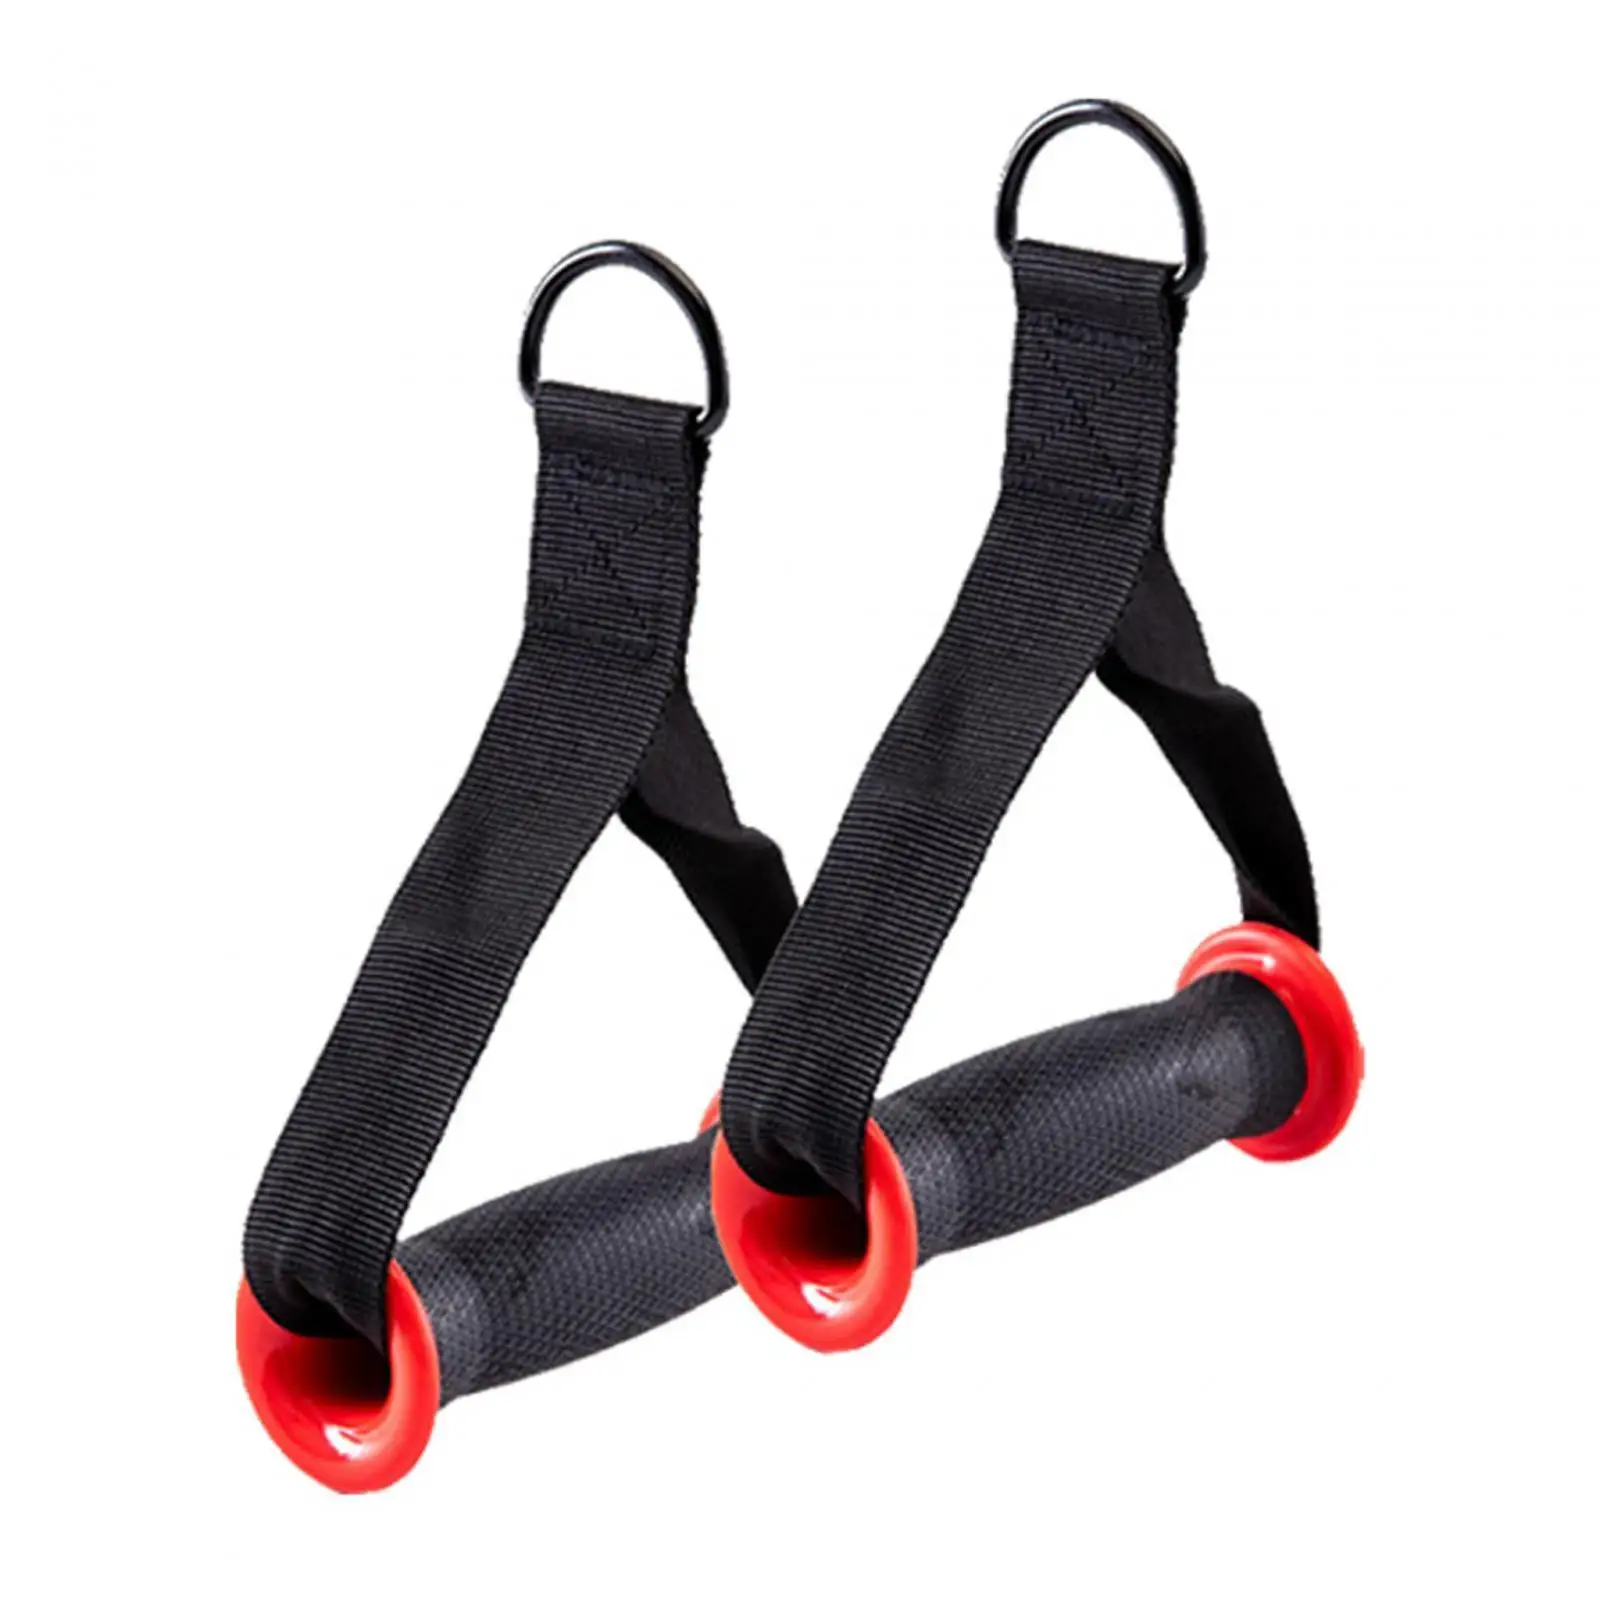 2 Pieces Gym Handle Heavy Duty Exercise Equipment Universal Gymnastics Hanging Stretch Tube Nylon Webbing Strength Pull Handles